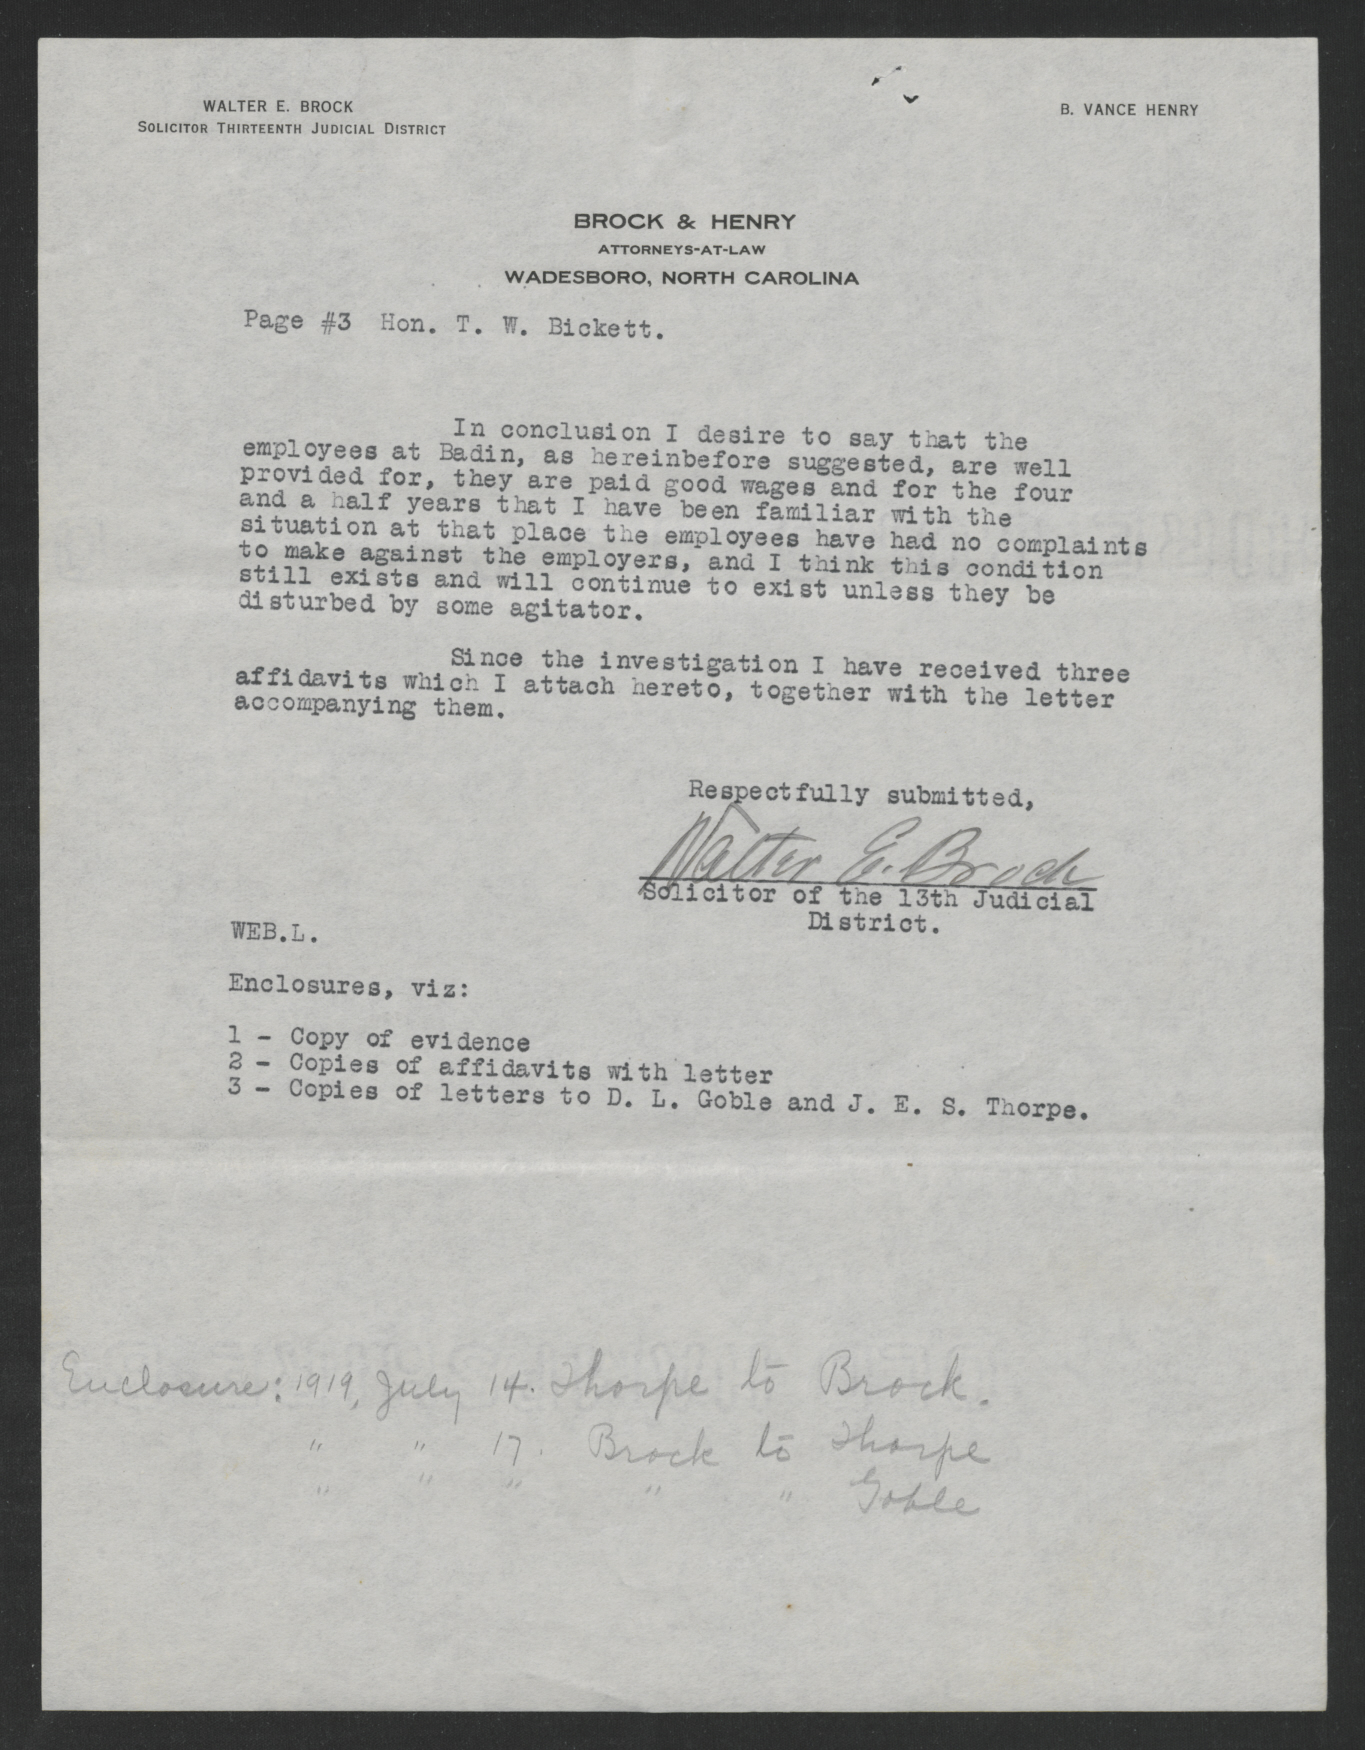 Letter from Walter E. Brock to Thomas W. Bickett, July 17, 1919, page 3